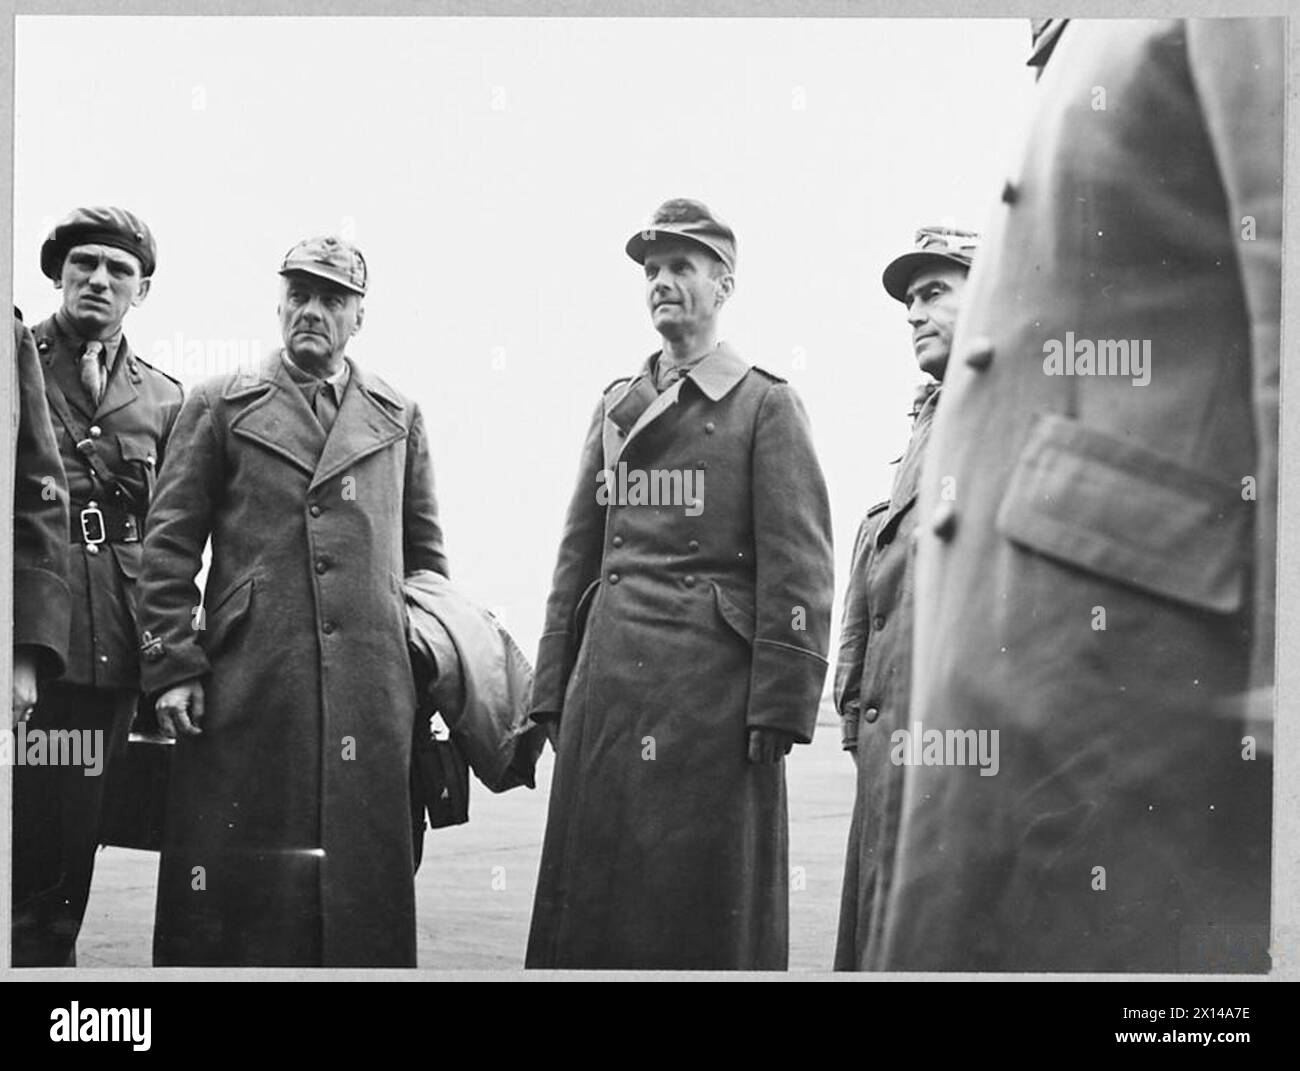 AXIS GENERALS ARRIVE IN SOUTH OF ENGLAND AS PRISONERS OF WAR. - 9958. Picture (issued 1943) shows - Brigadier General Costa [left] and Colonel von Hulsen being asked if they have had a comfortable journey and is they have any complaints Royal Air Force Stock Photo